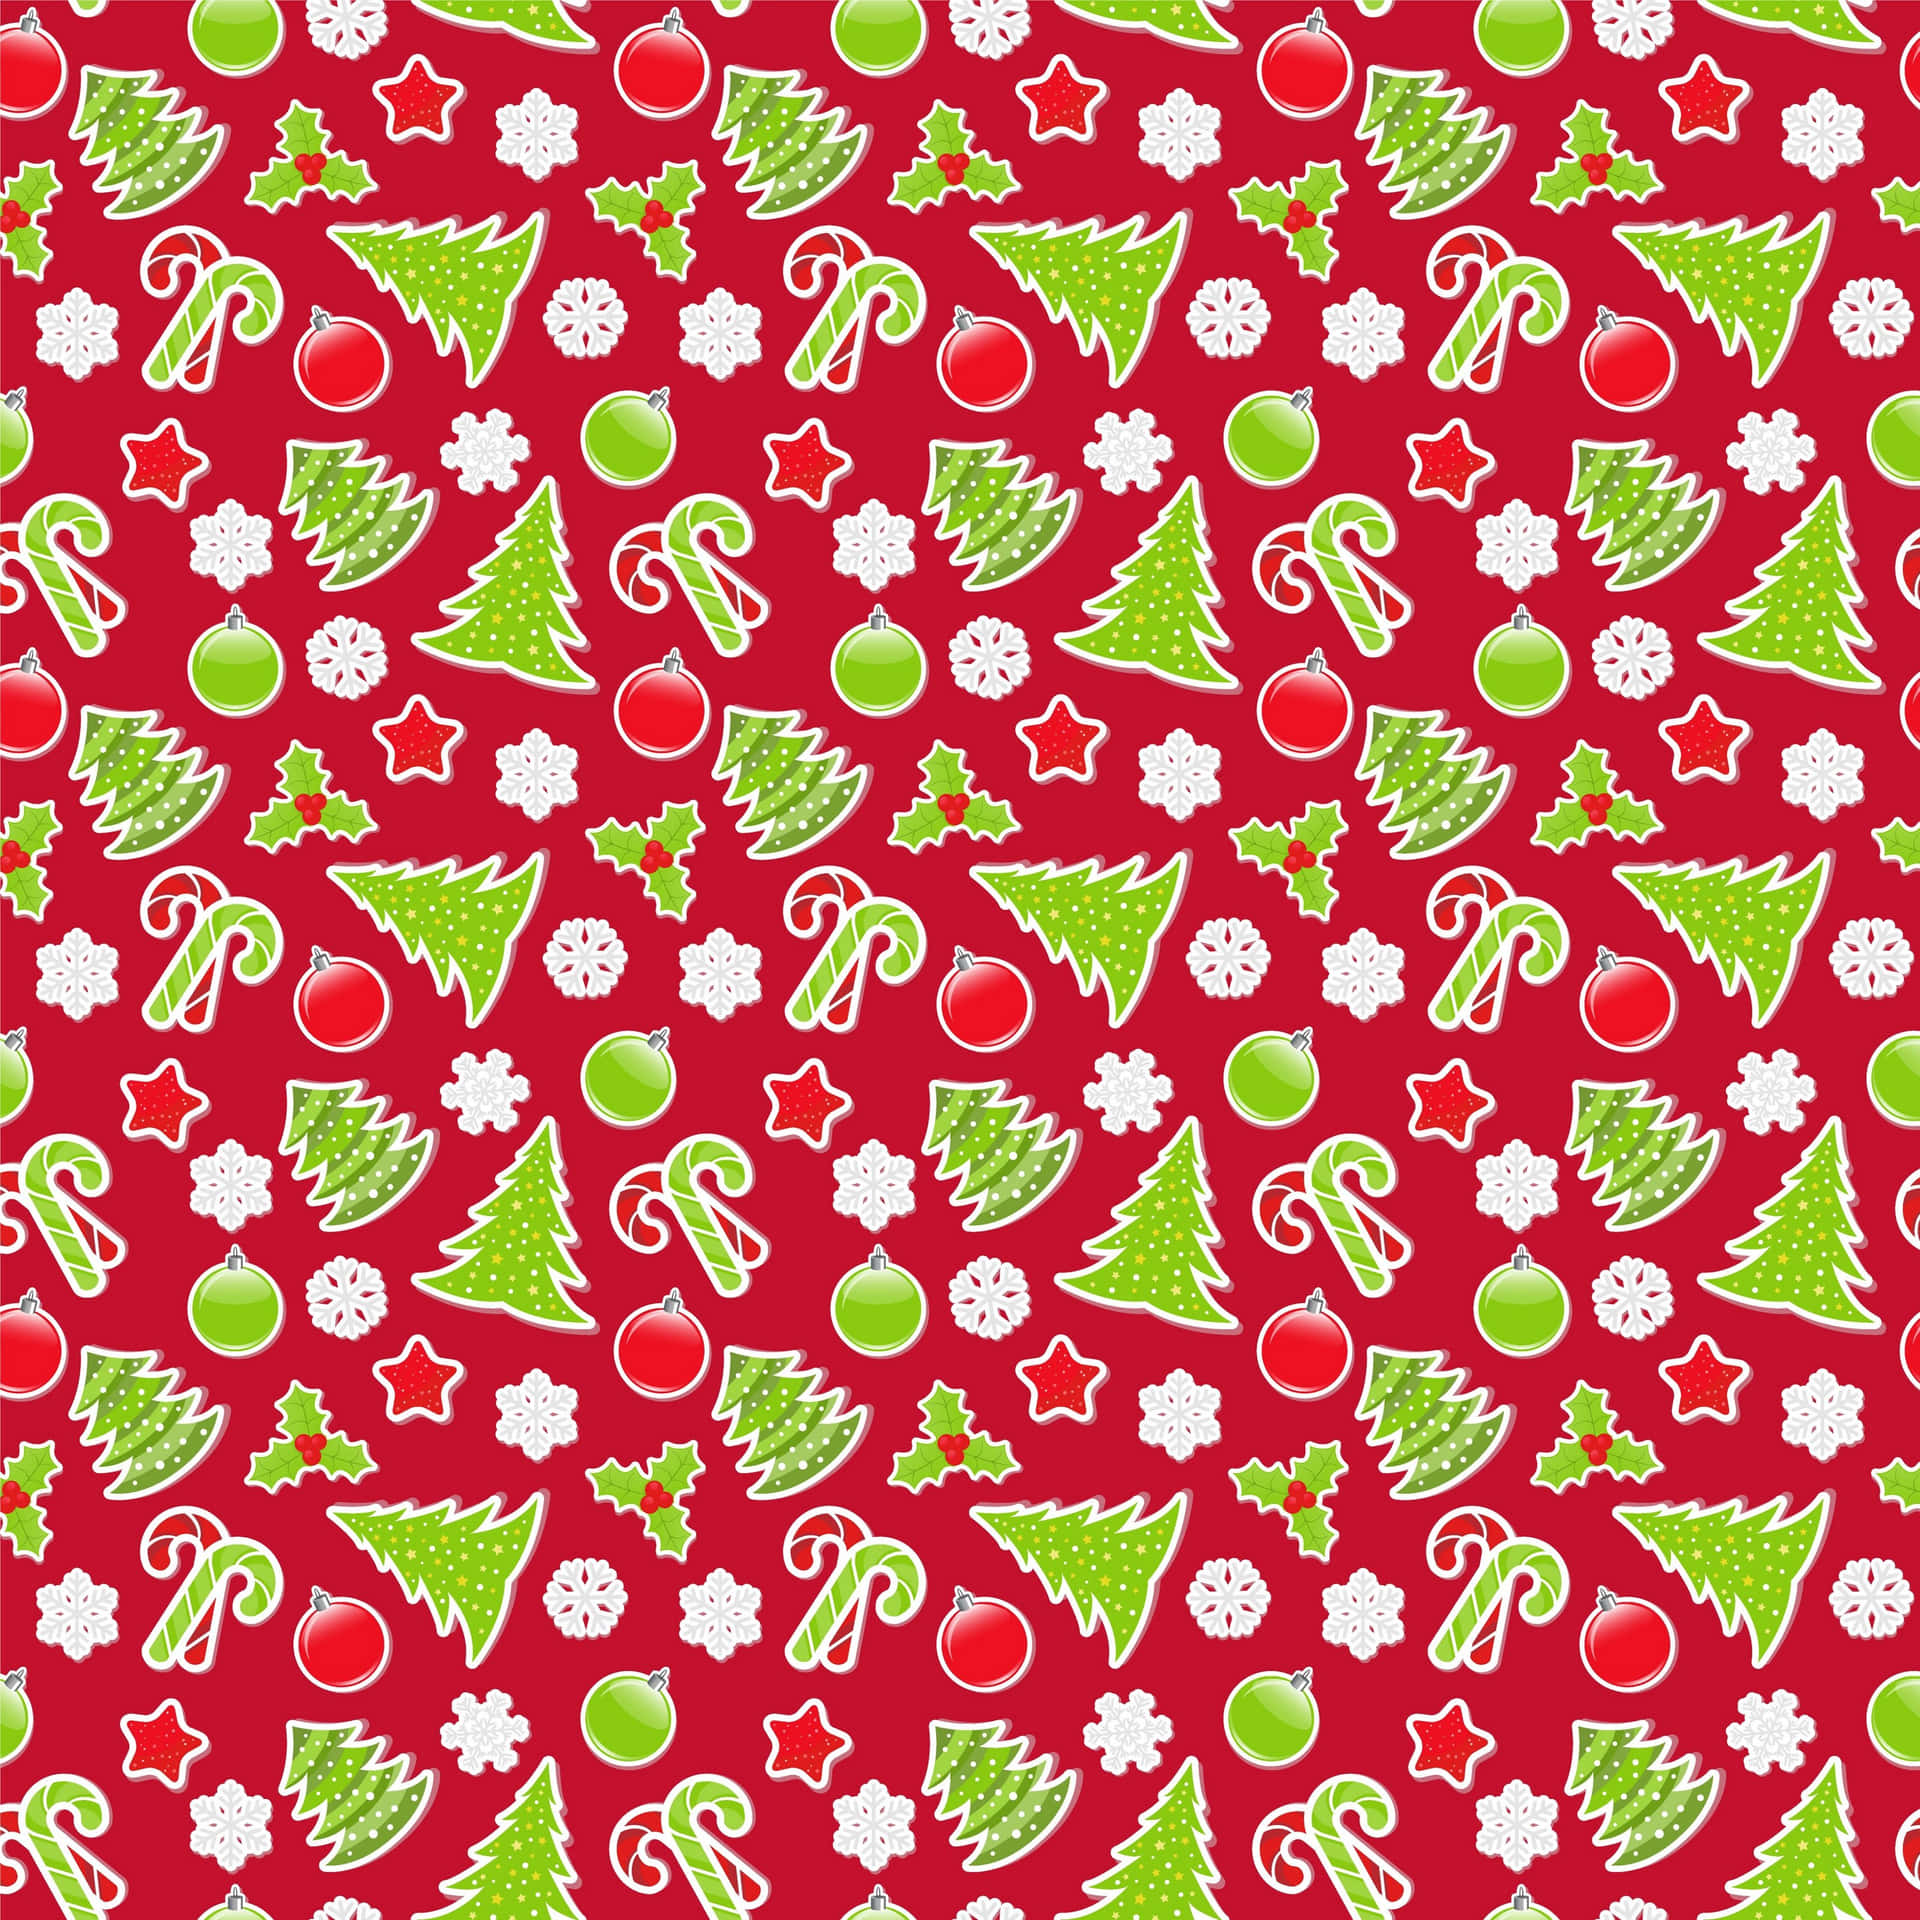 Brighten up your holidays with this colorful Christmas pattern Wallpaper